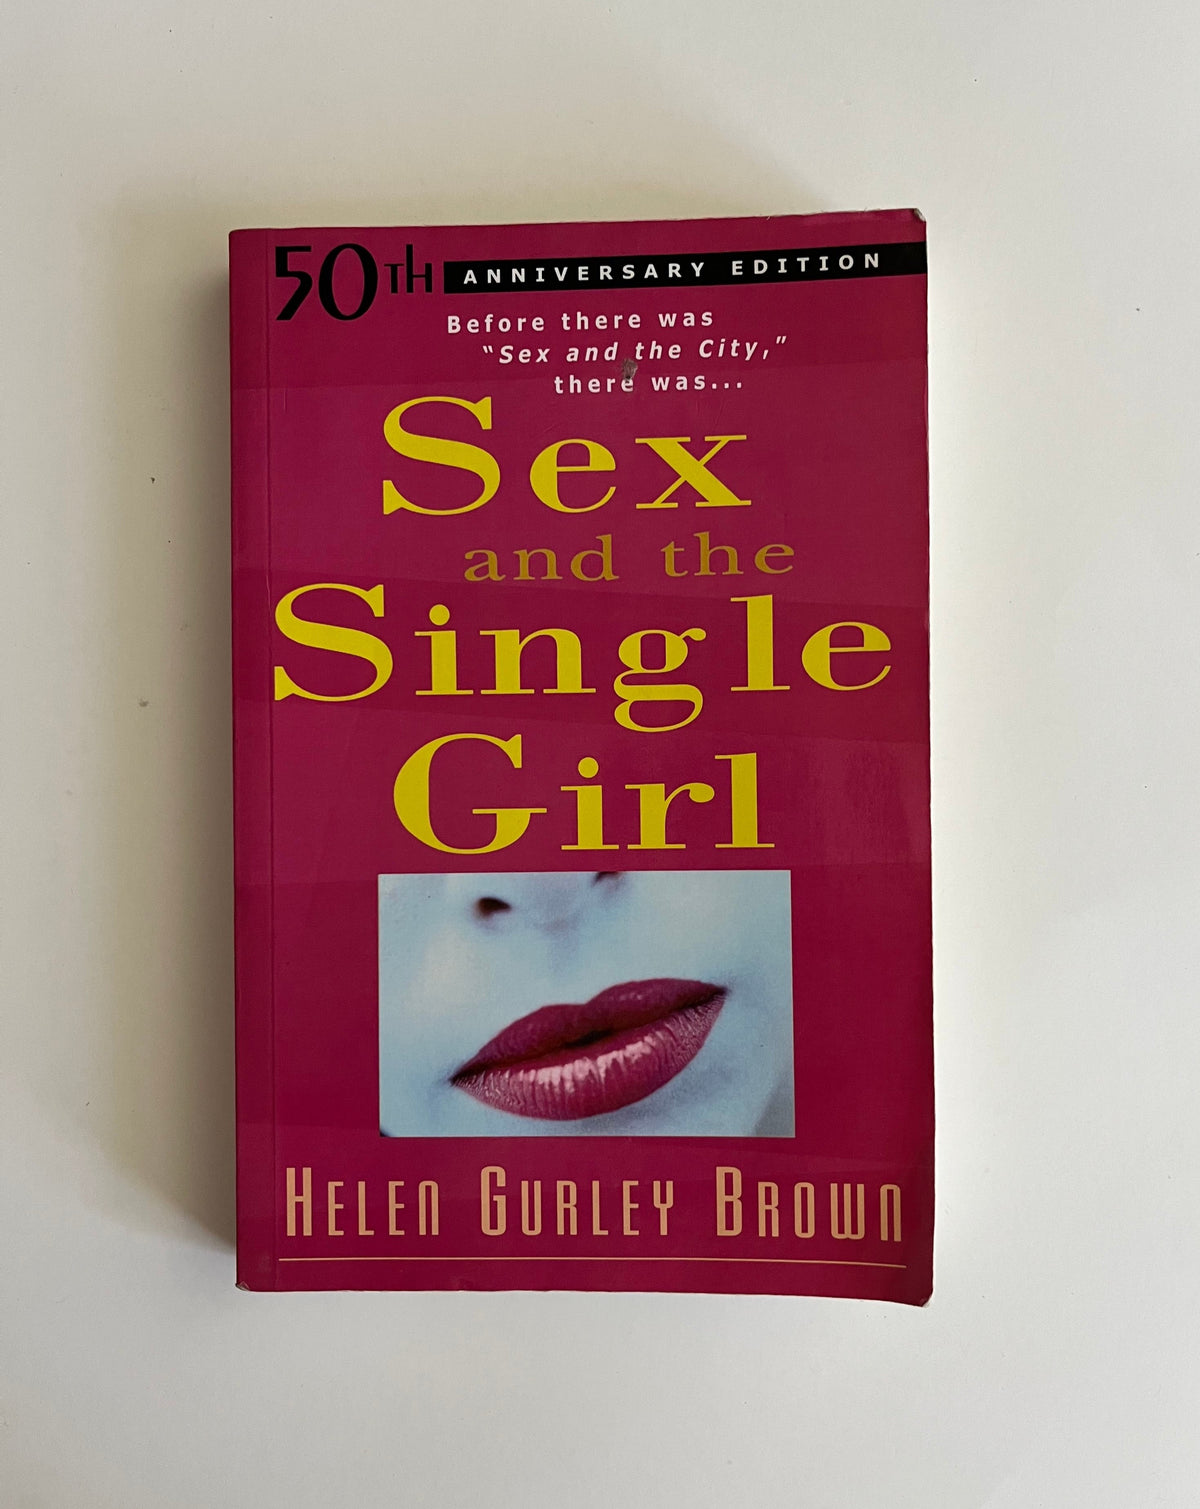 Sex and the Single Girl by Helen Gurley Brown